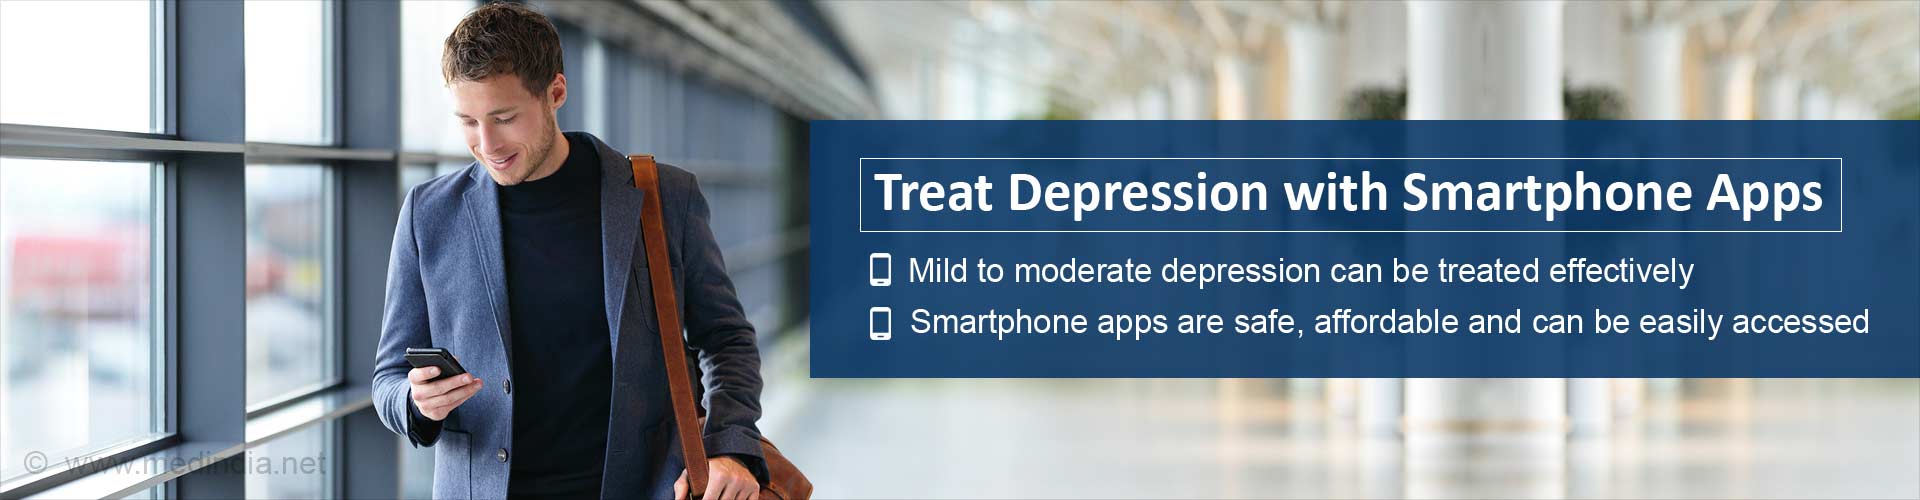 Treat depression with smartphone apps
- Mild to moderate depression can be treated effectively
- Smartphone apps are safe, affordable and can be easily accessed